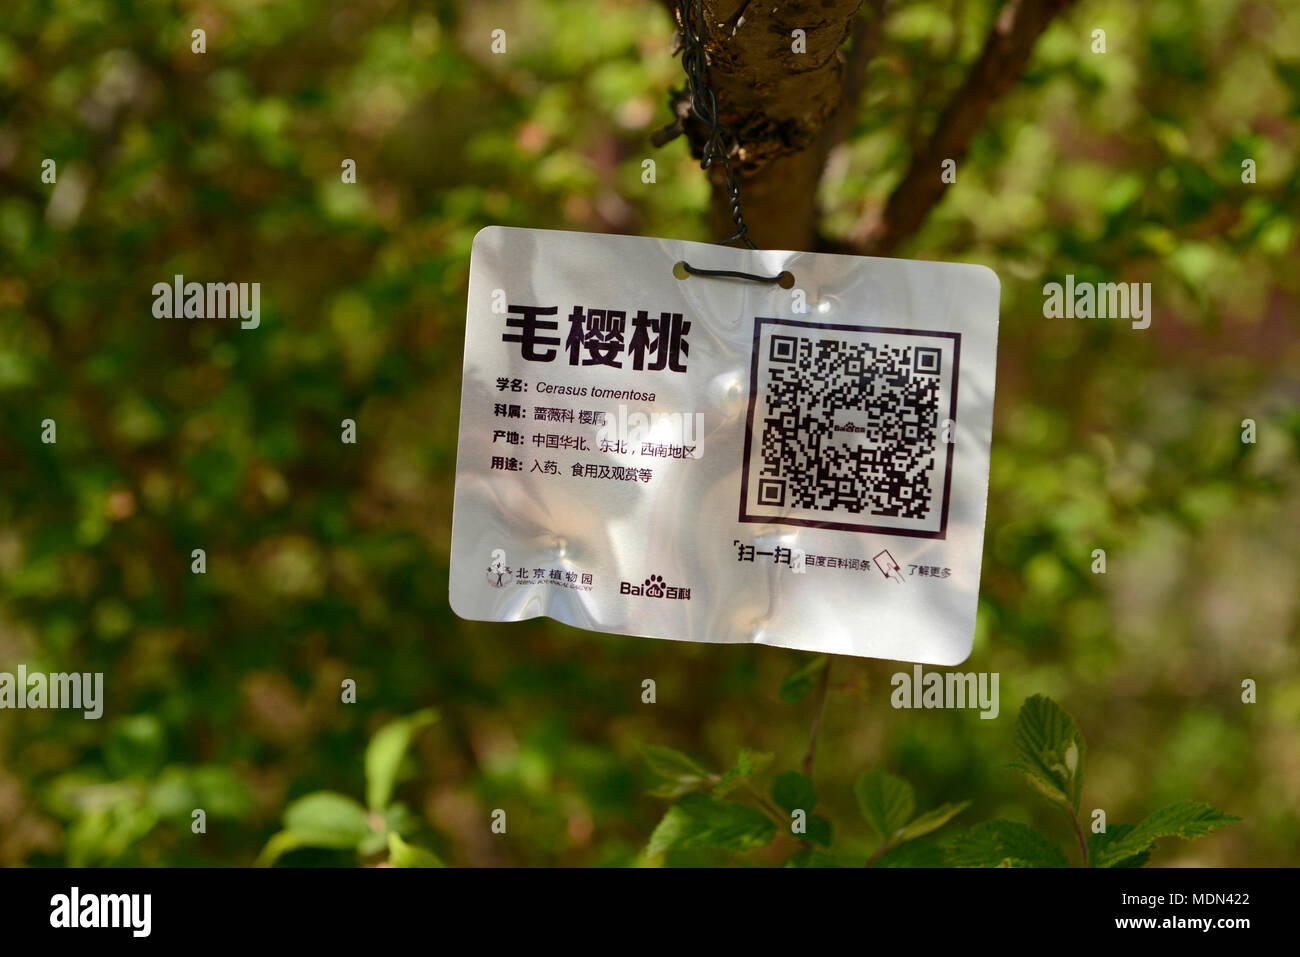 Modern label of Cerasus, or Prunus, species of Sour Cherry with a QR code on a sour cherry tree in Beijing Botanic (north) garden, Beijing, China Stock Photo